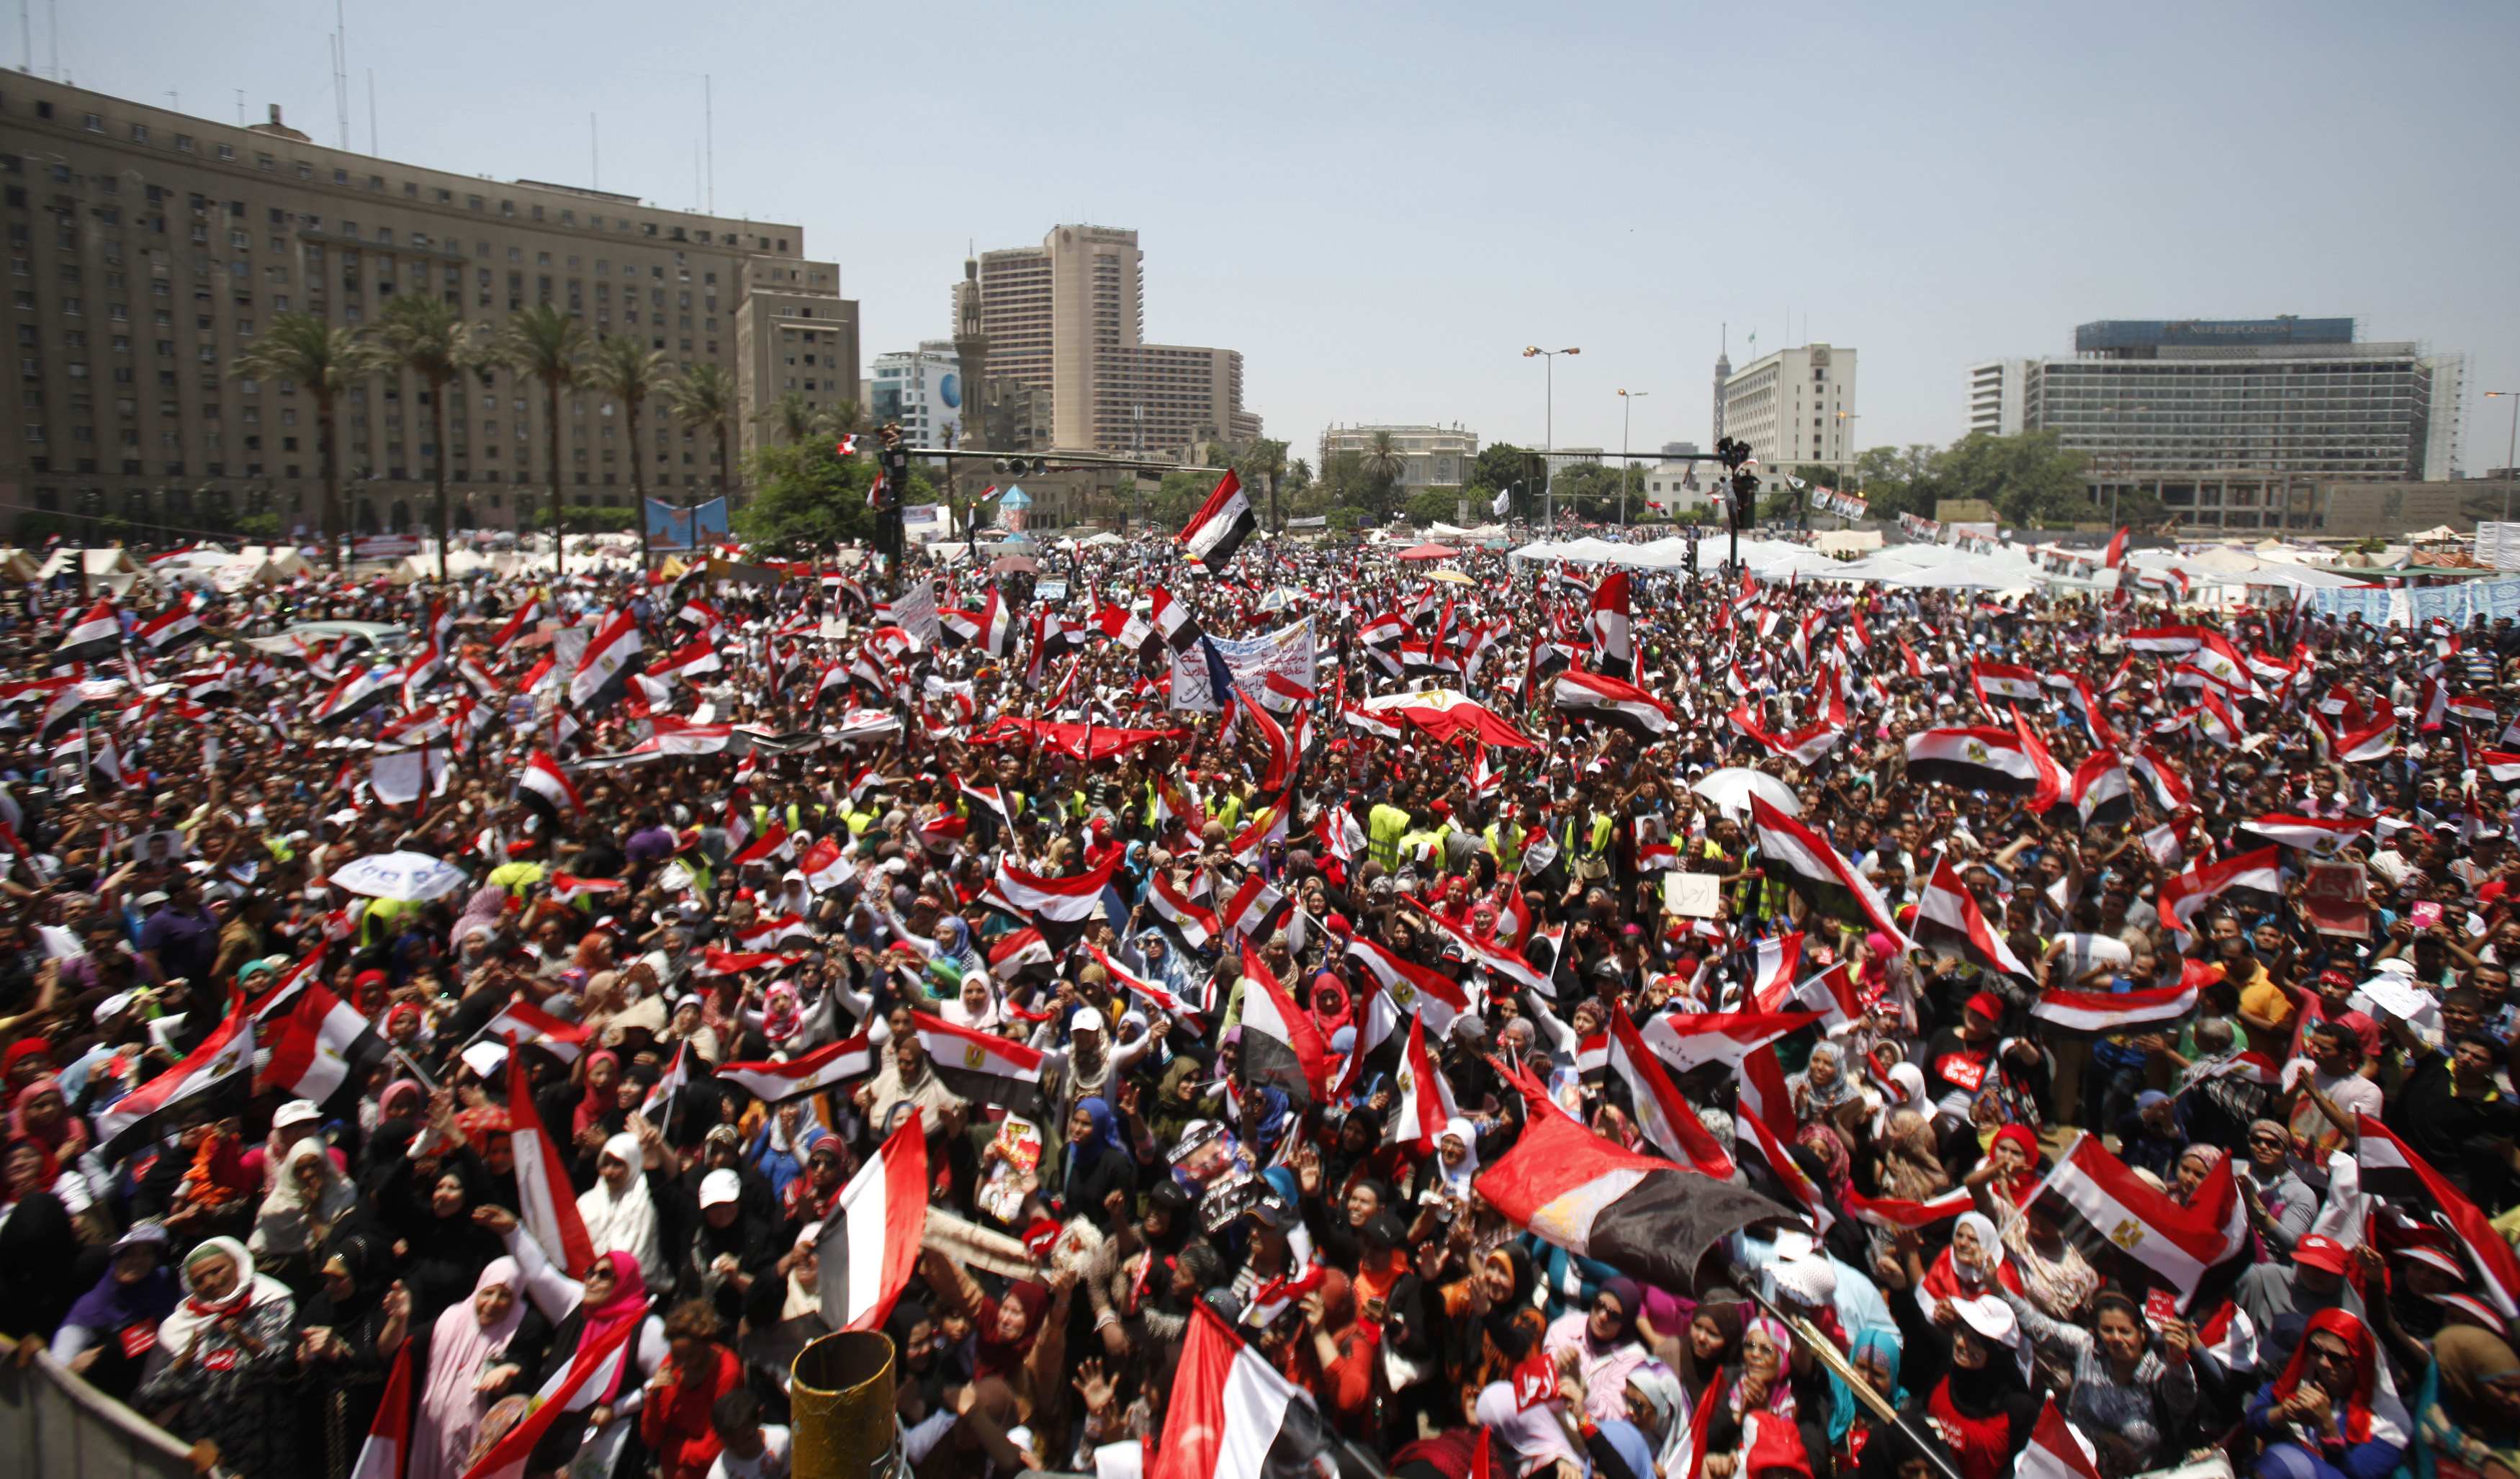 Crowds gather in Cairo for anti-Morsi rallies